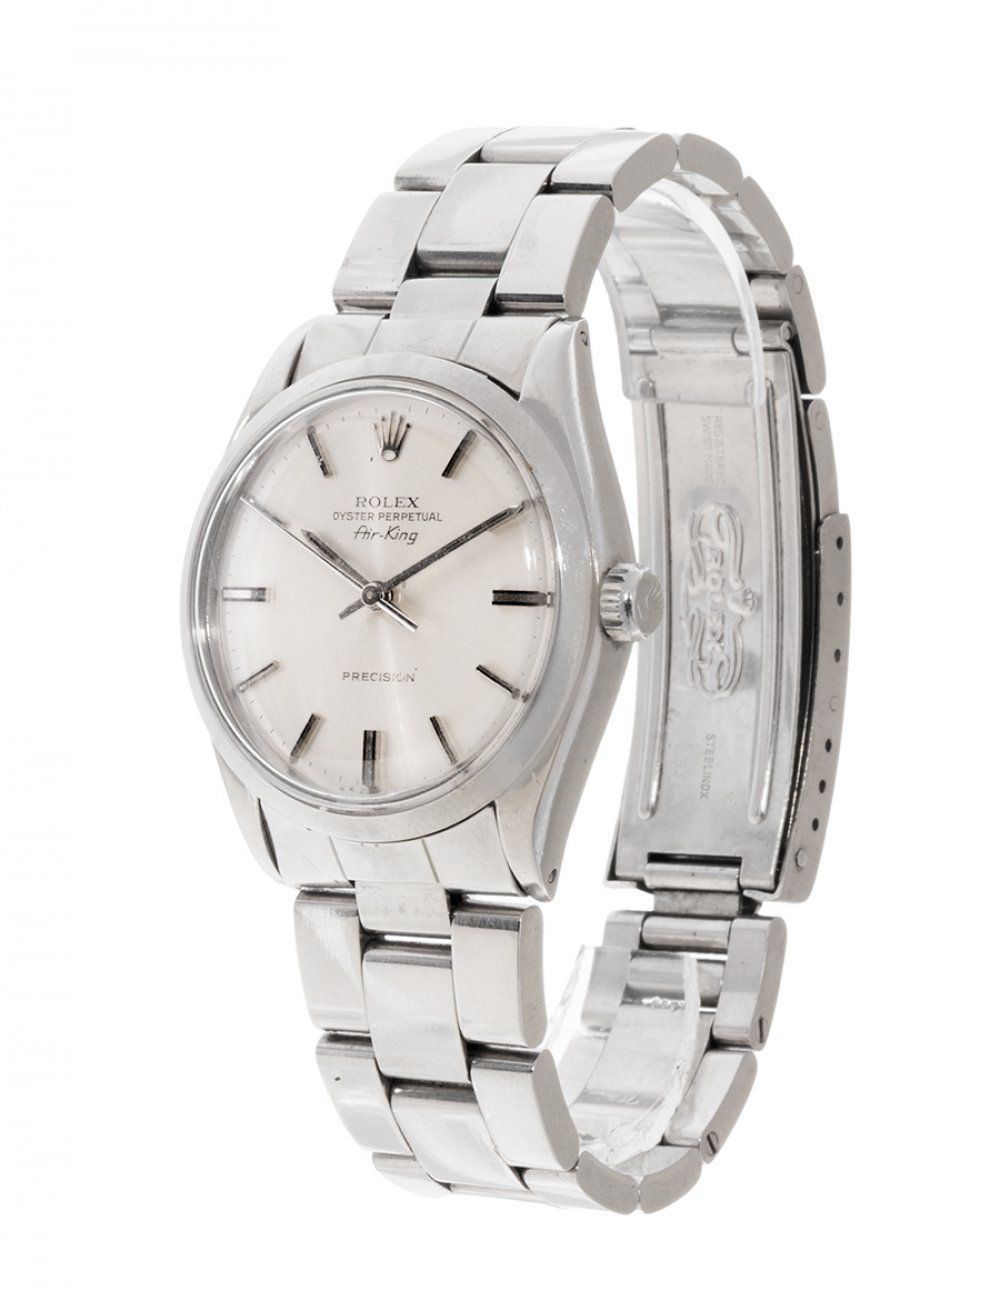 Null Montre ROLEX Oyster Perpetual AIR KING, unisexe. Série 5500. Vers 1983. Cad&hellip;